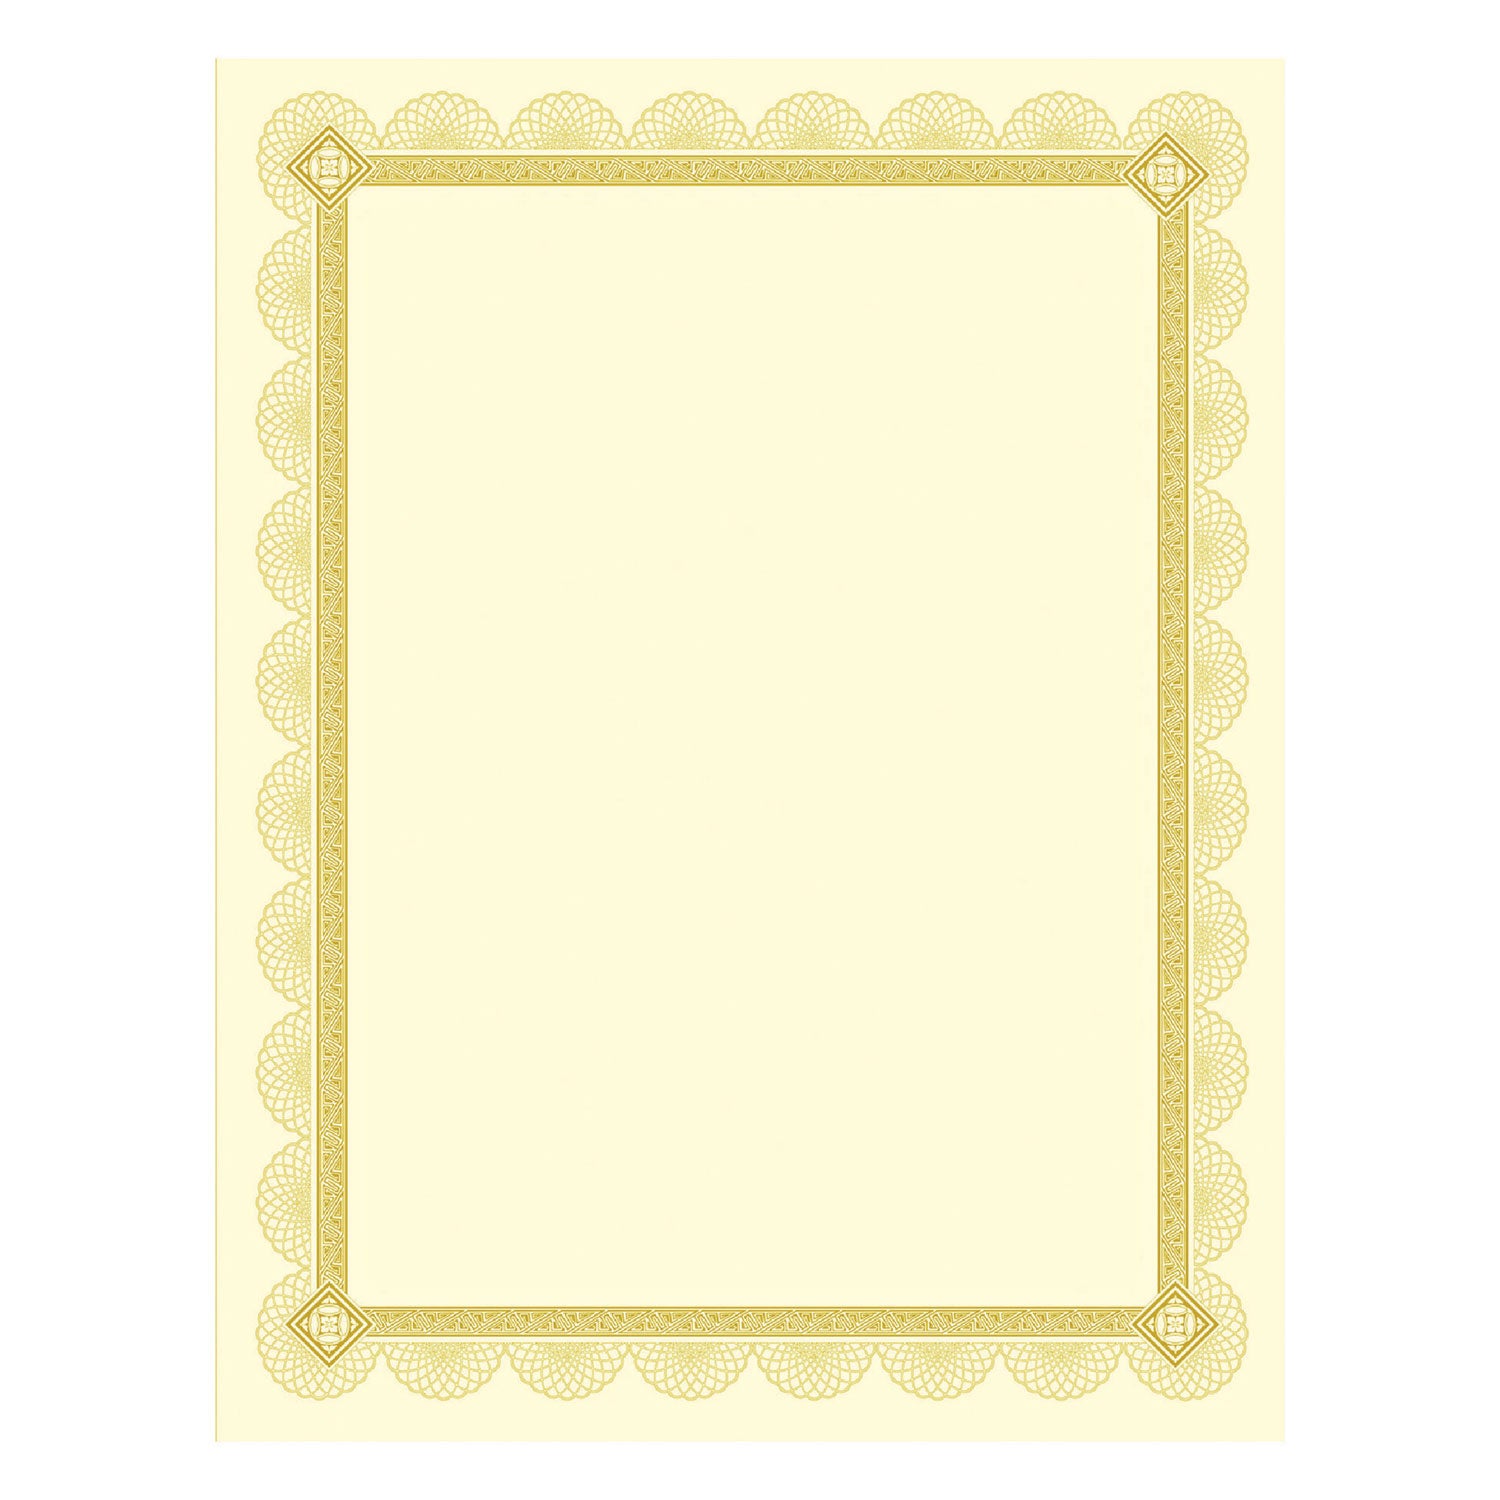 Premium Certificates, 8.5 x 11, Ivory/Gold with Spiro Gold Foil Border,15/Pack - 